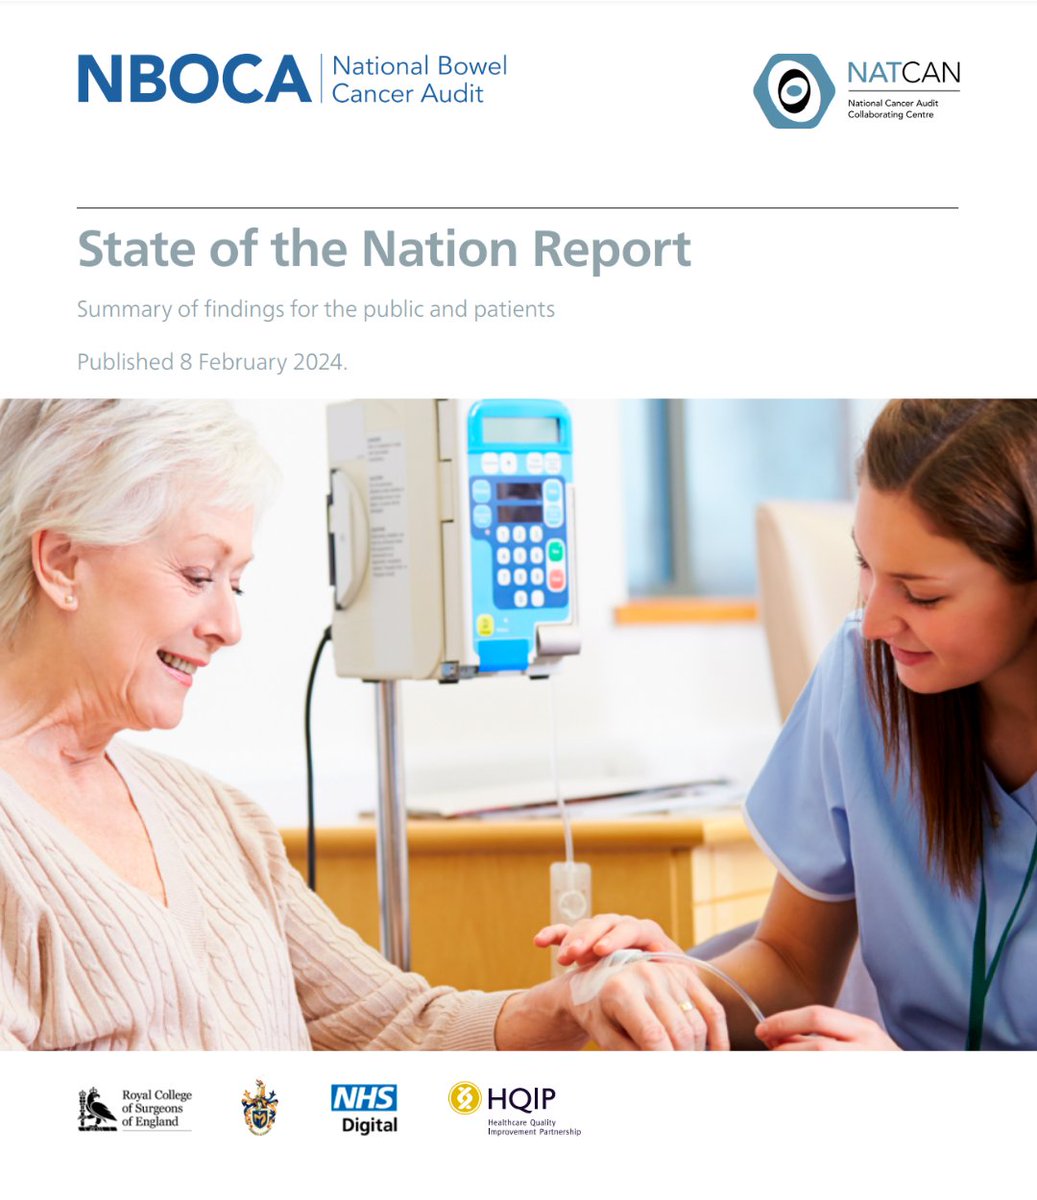 The @NBOCA_CEU State of the Nation report has been published today, which is an audit of the care received by people with bowel cancer in England and Wales between 1st April 2021 and 31st March 2022. Read the summary report here: nboca.org.uk/content/upload… #BowelCancer #BowelCare